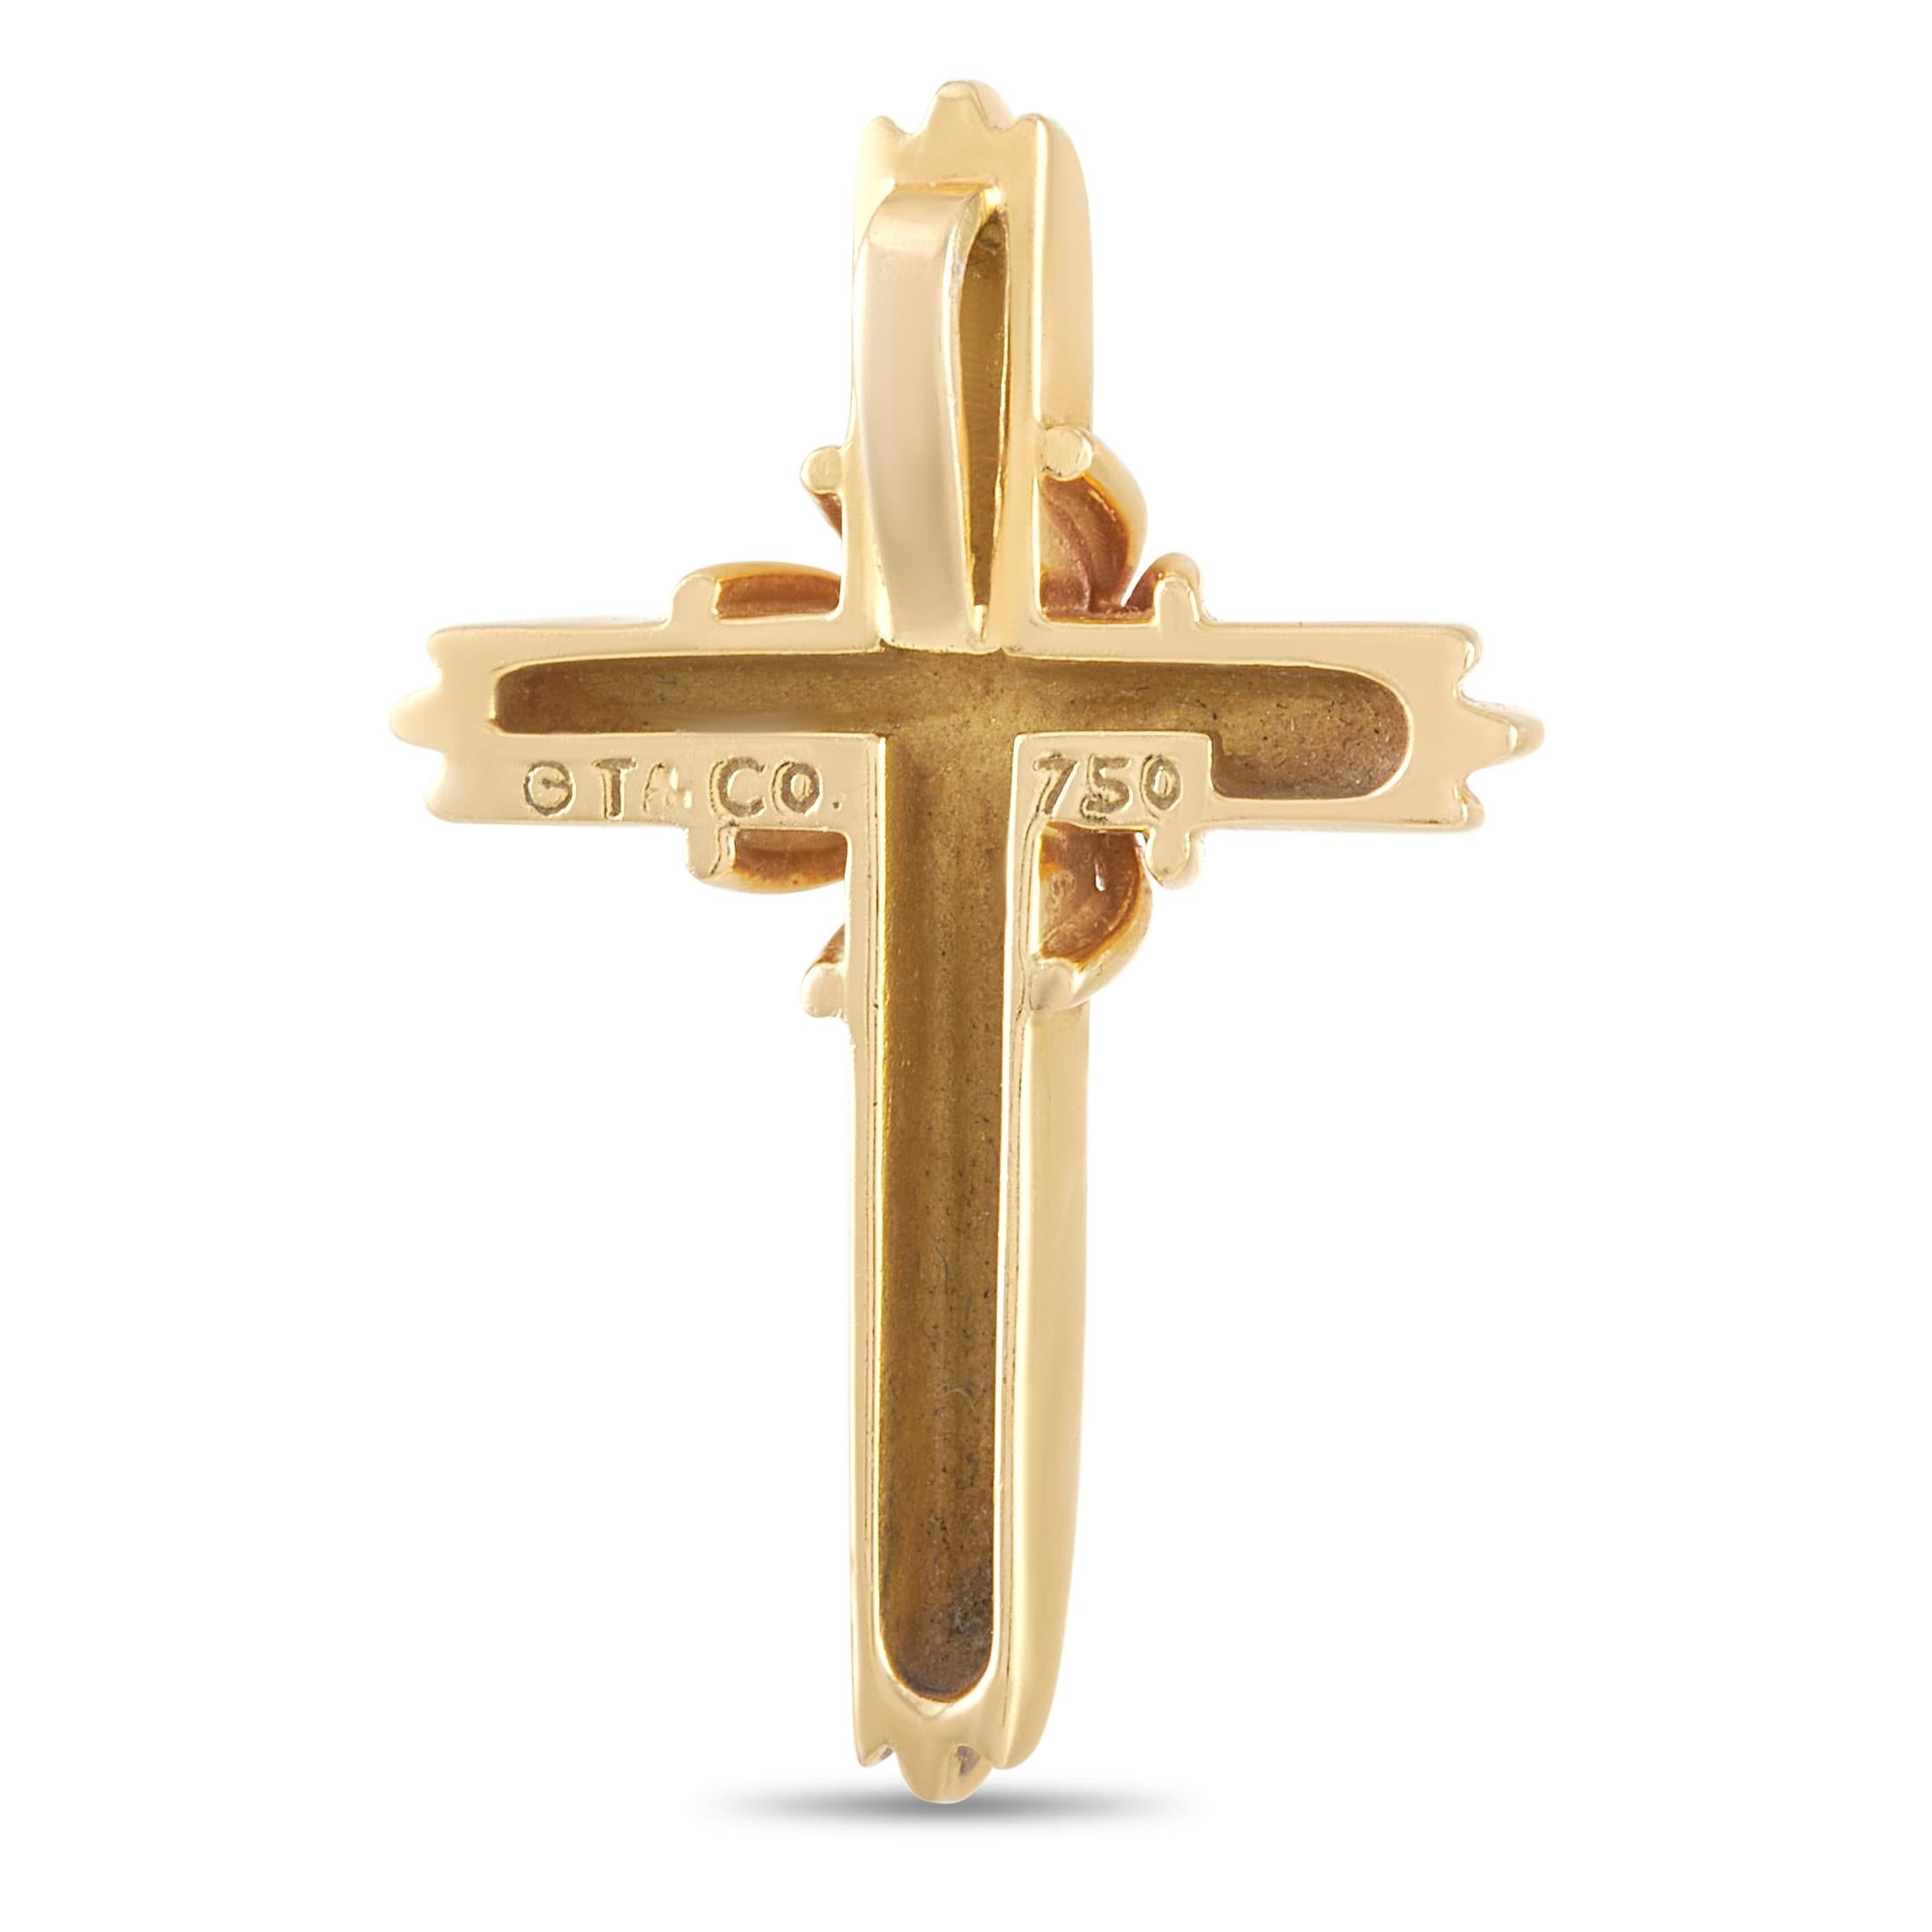 This pretty Tiffany & Co.18K Yellow Gold Cross Pendant is made with 18K yellow gold and measures 1 inch in length by 0.75 inches in width. The pendant weighs a total of 4.4 grams. 
 
 This pendant is presented in estate condition and includes a gift